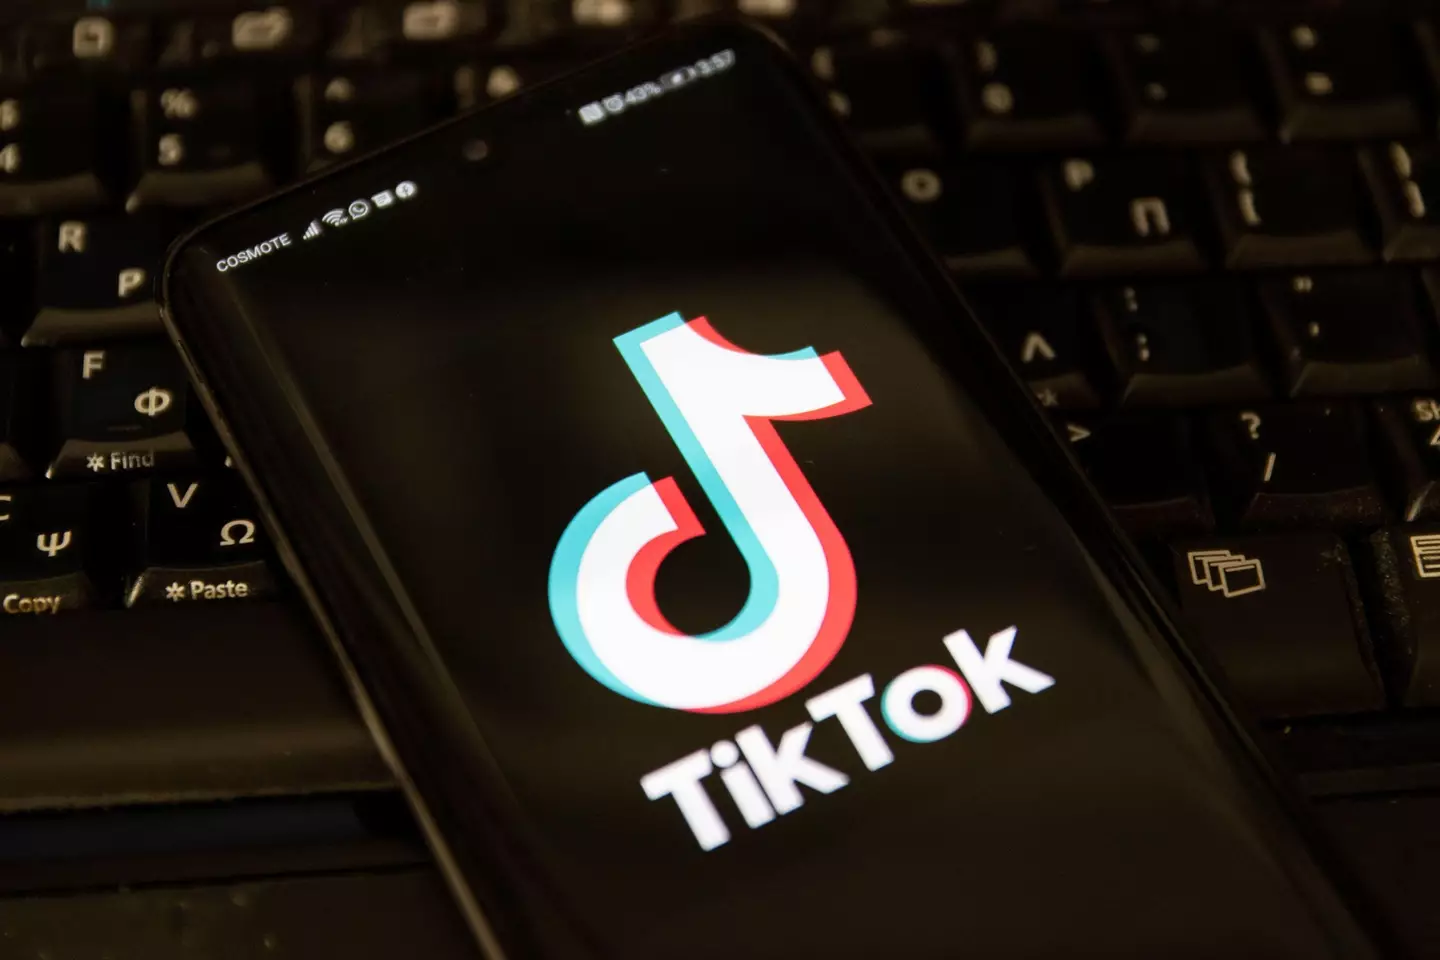 Some politicians are very worried about the privacy risks posed by TikTok.